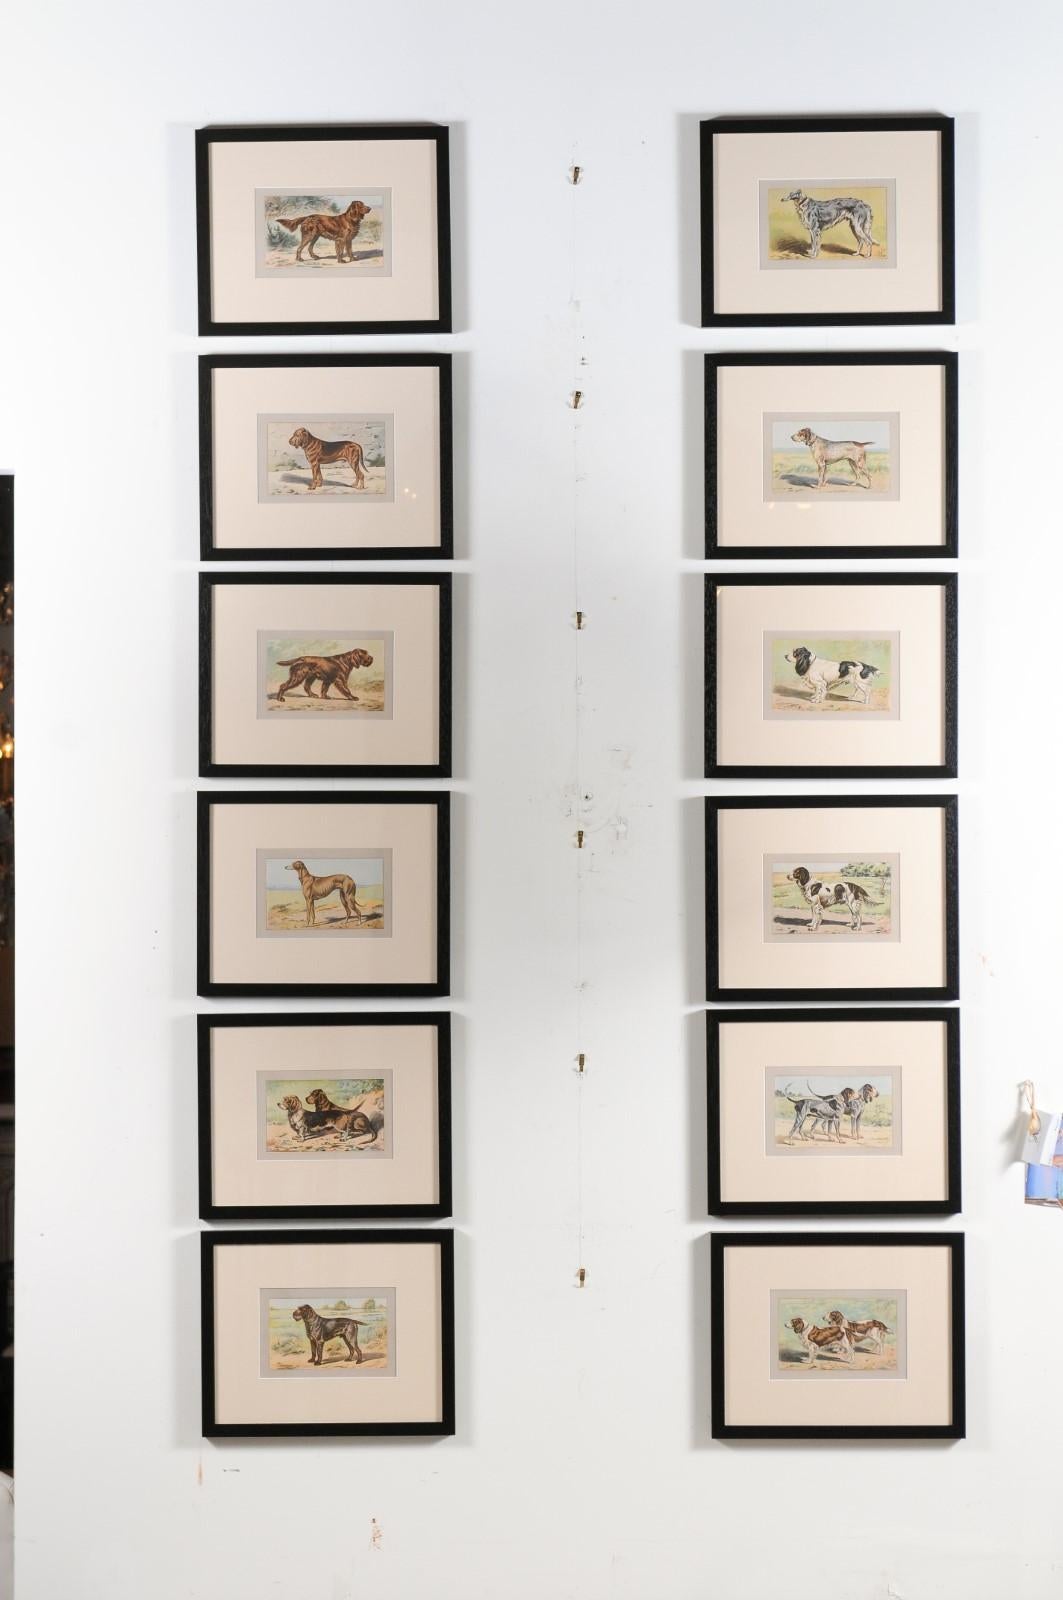 11 P. Mahler dog lithograph prints from the 20th century, in black frames, sold $495 each. Created by German artist P. Mahler for a book entitled Les Chiens le Gibier et Ses Ennemis (The Dogs, the Game and their Enemies), published by Mimard &